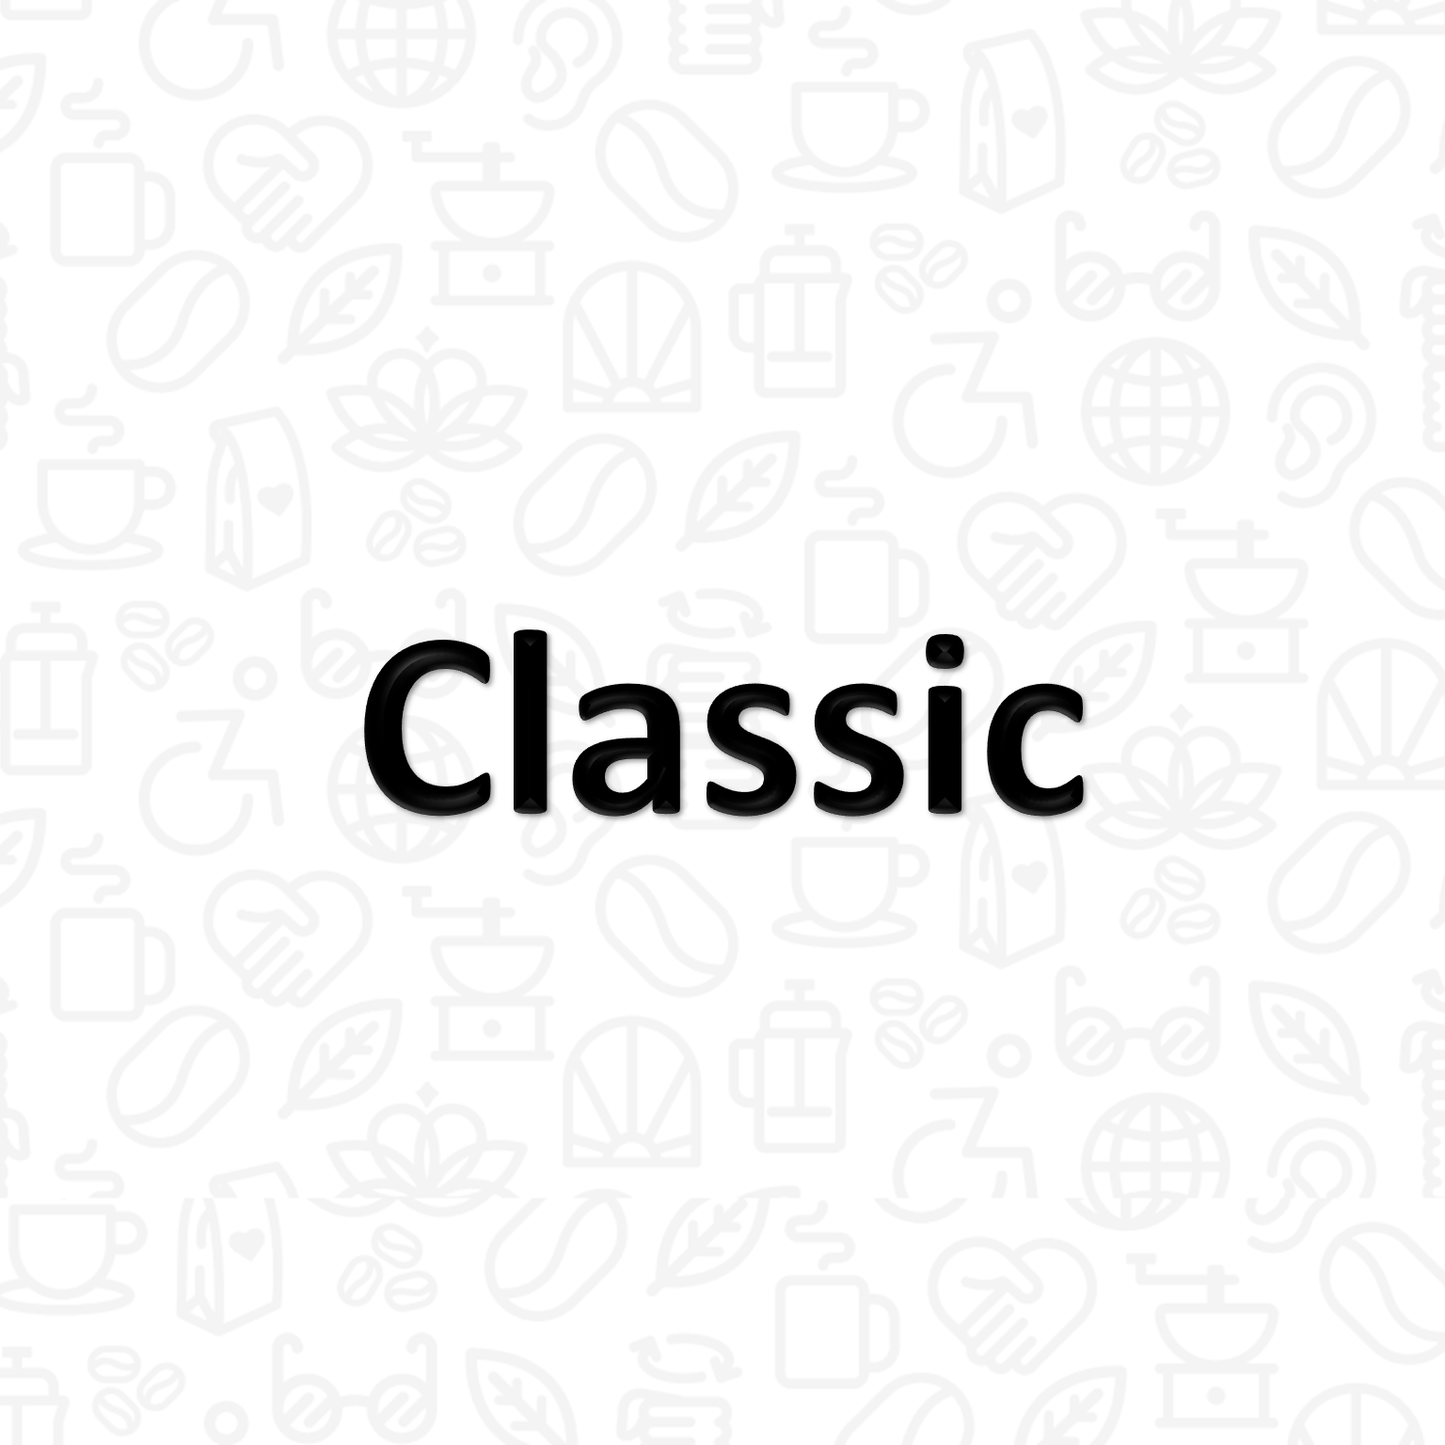 The word "Classic" on a background covered with coffee and disability icons in line art